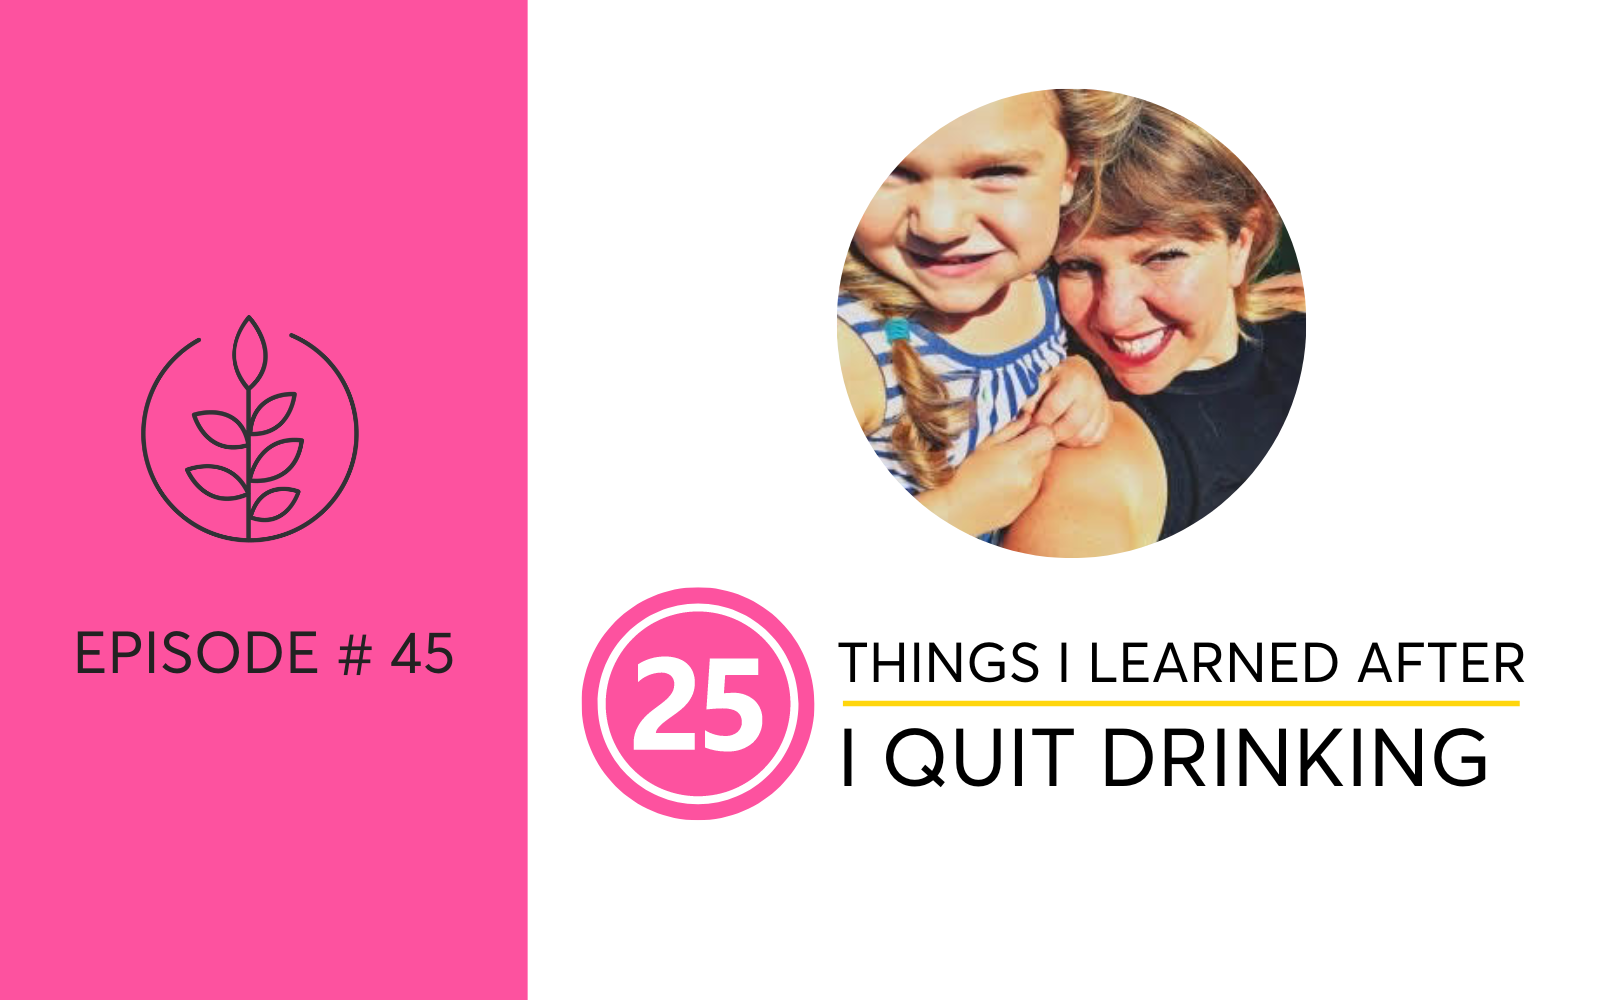 25 Things I Learned After I Quit Drinking